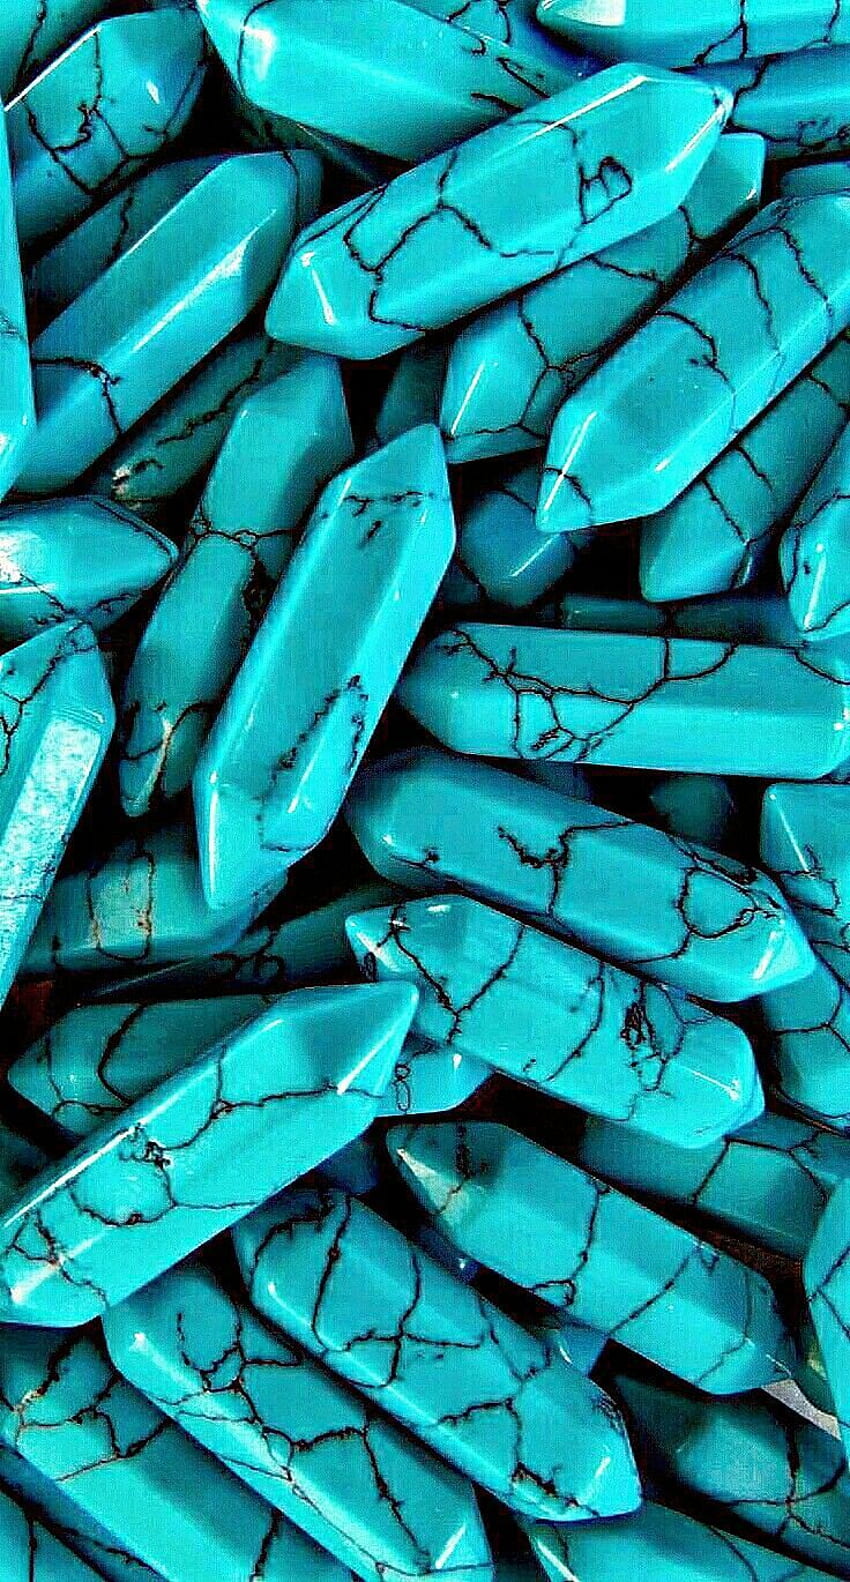 A close up of turquoise colored beads - Turquoise